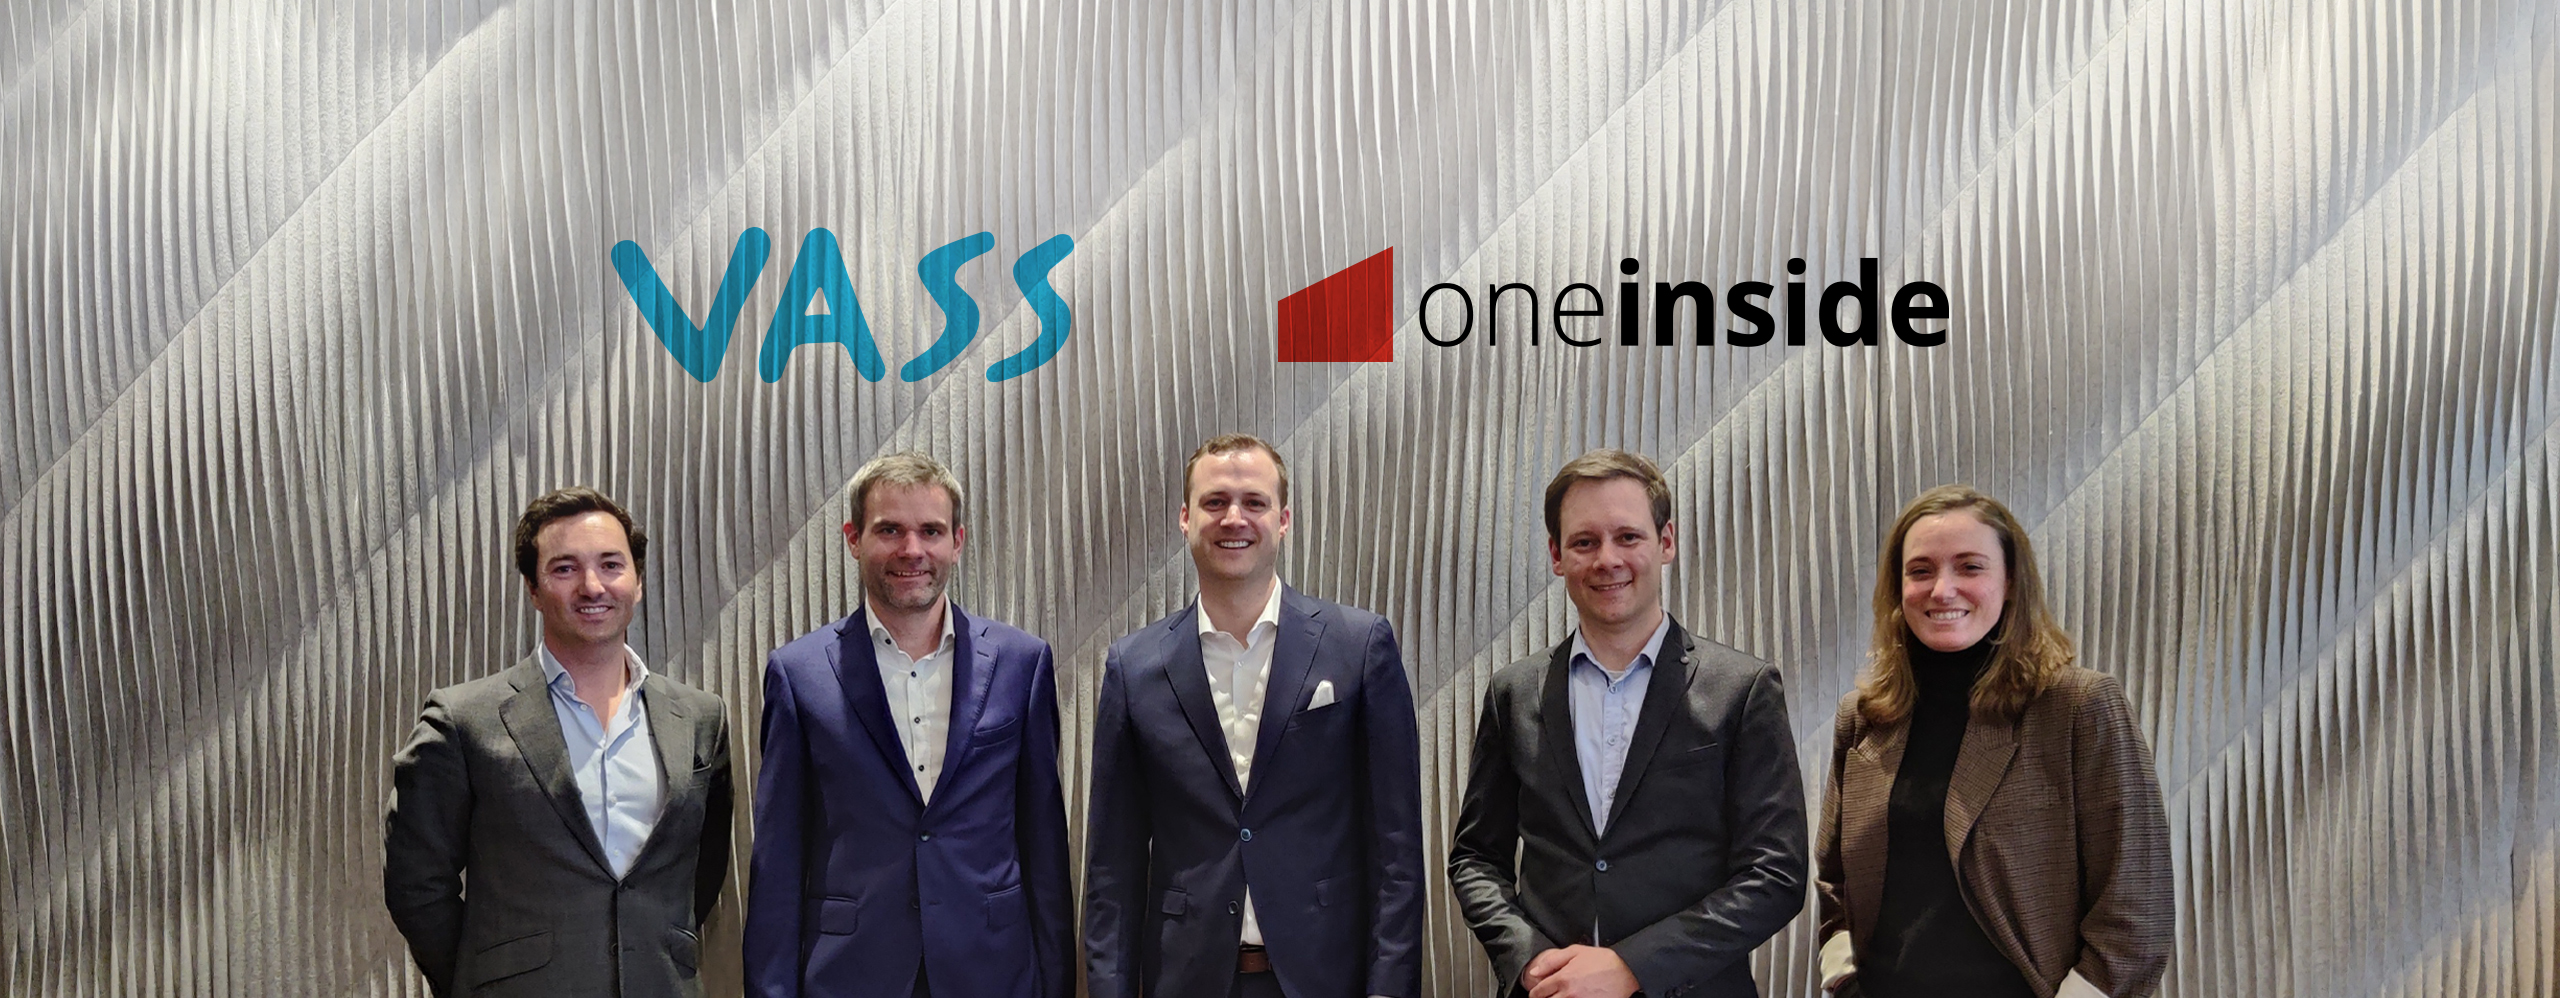 VASS signs agreement to acquire One Inside, a leading Adobe technology solutions specialist based in Switzerland